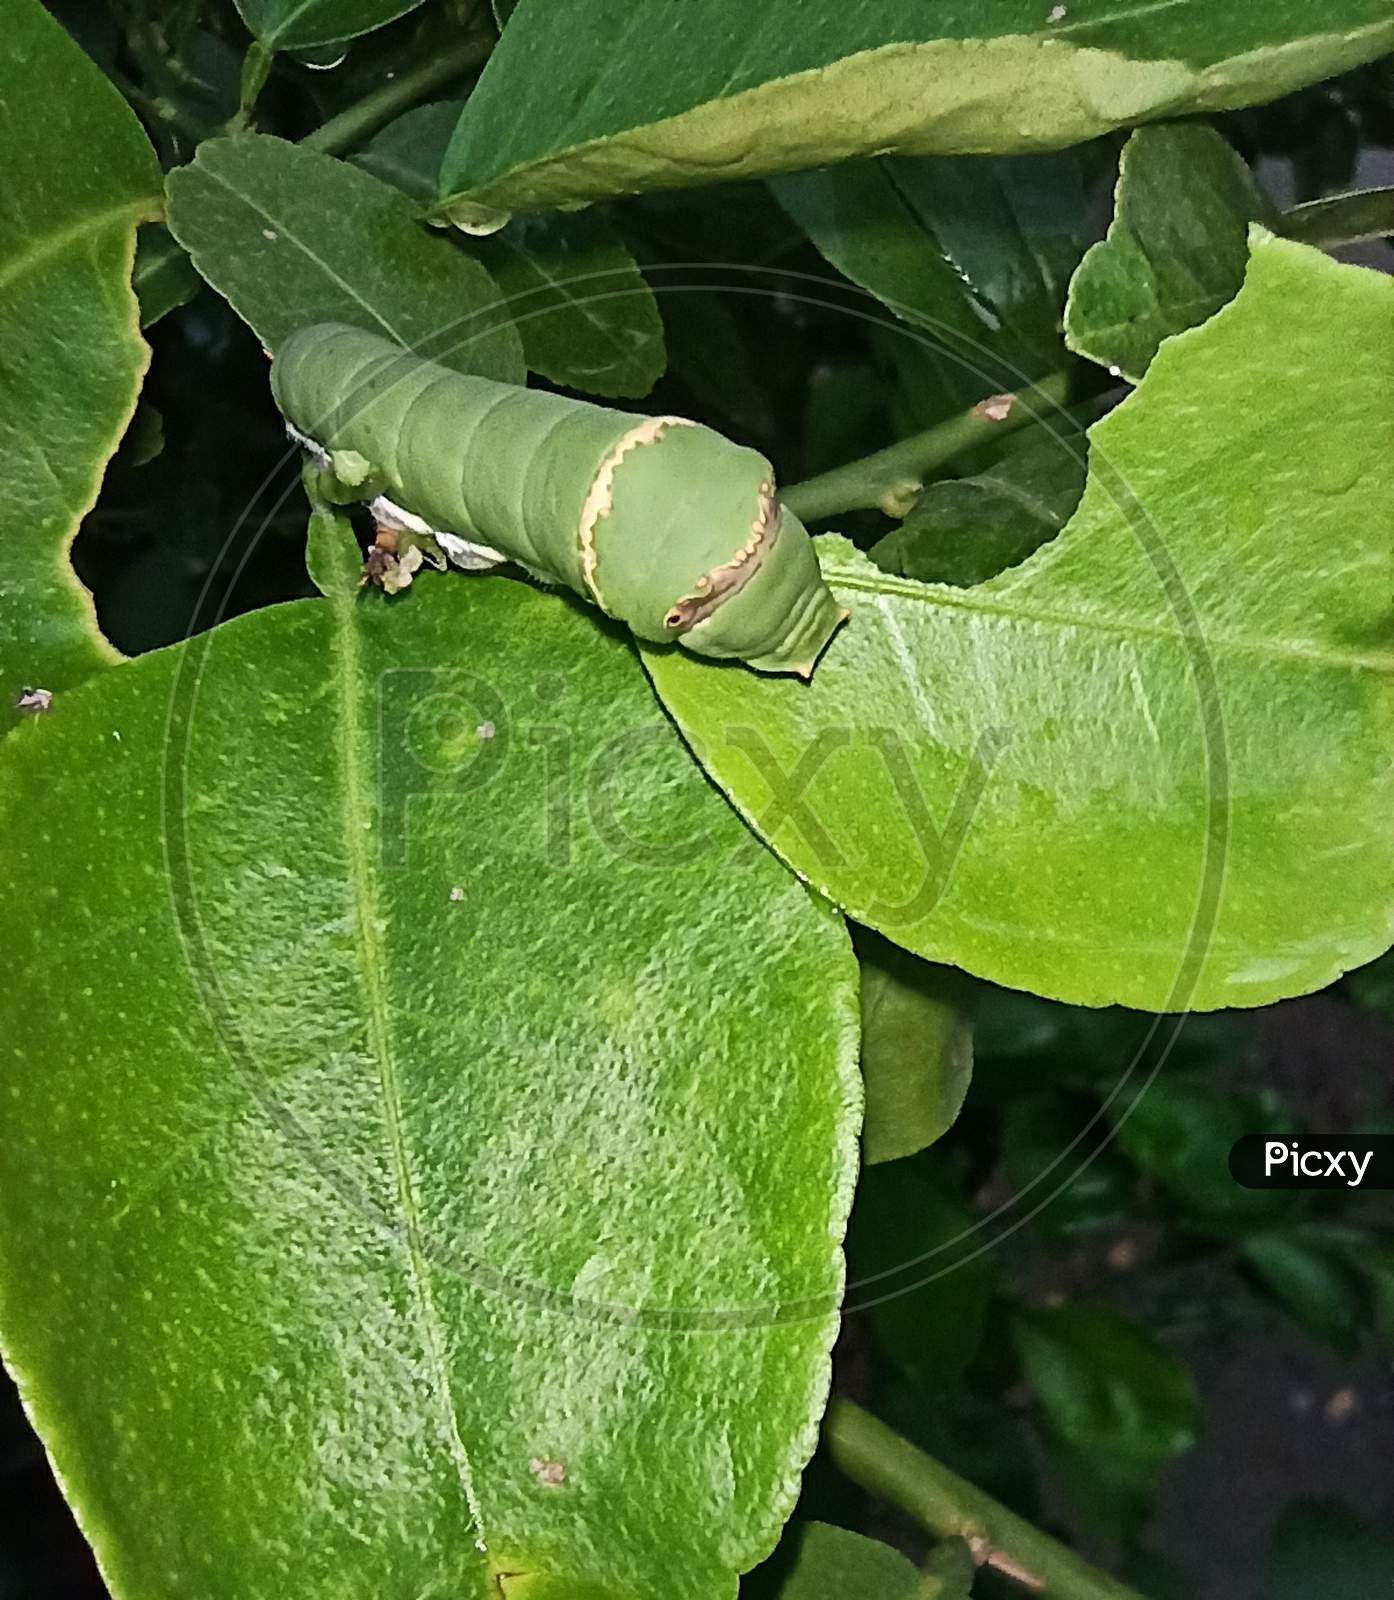 A green colored insect on a plant stem